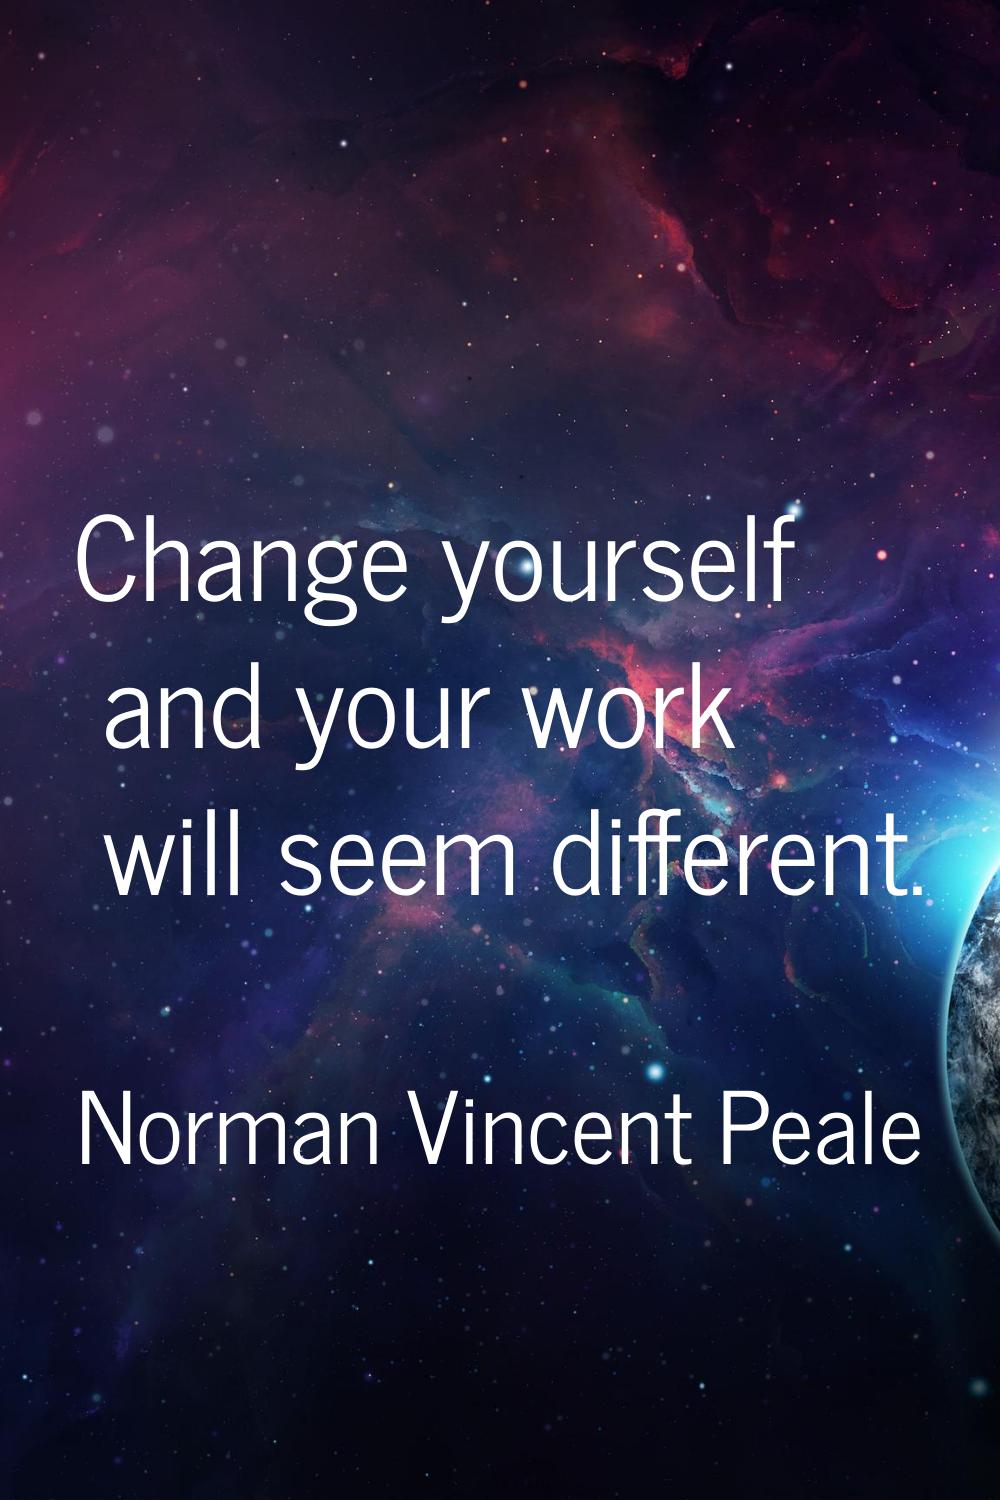 Change yourself and your work will seem different.